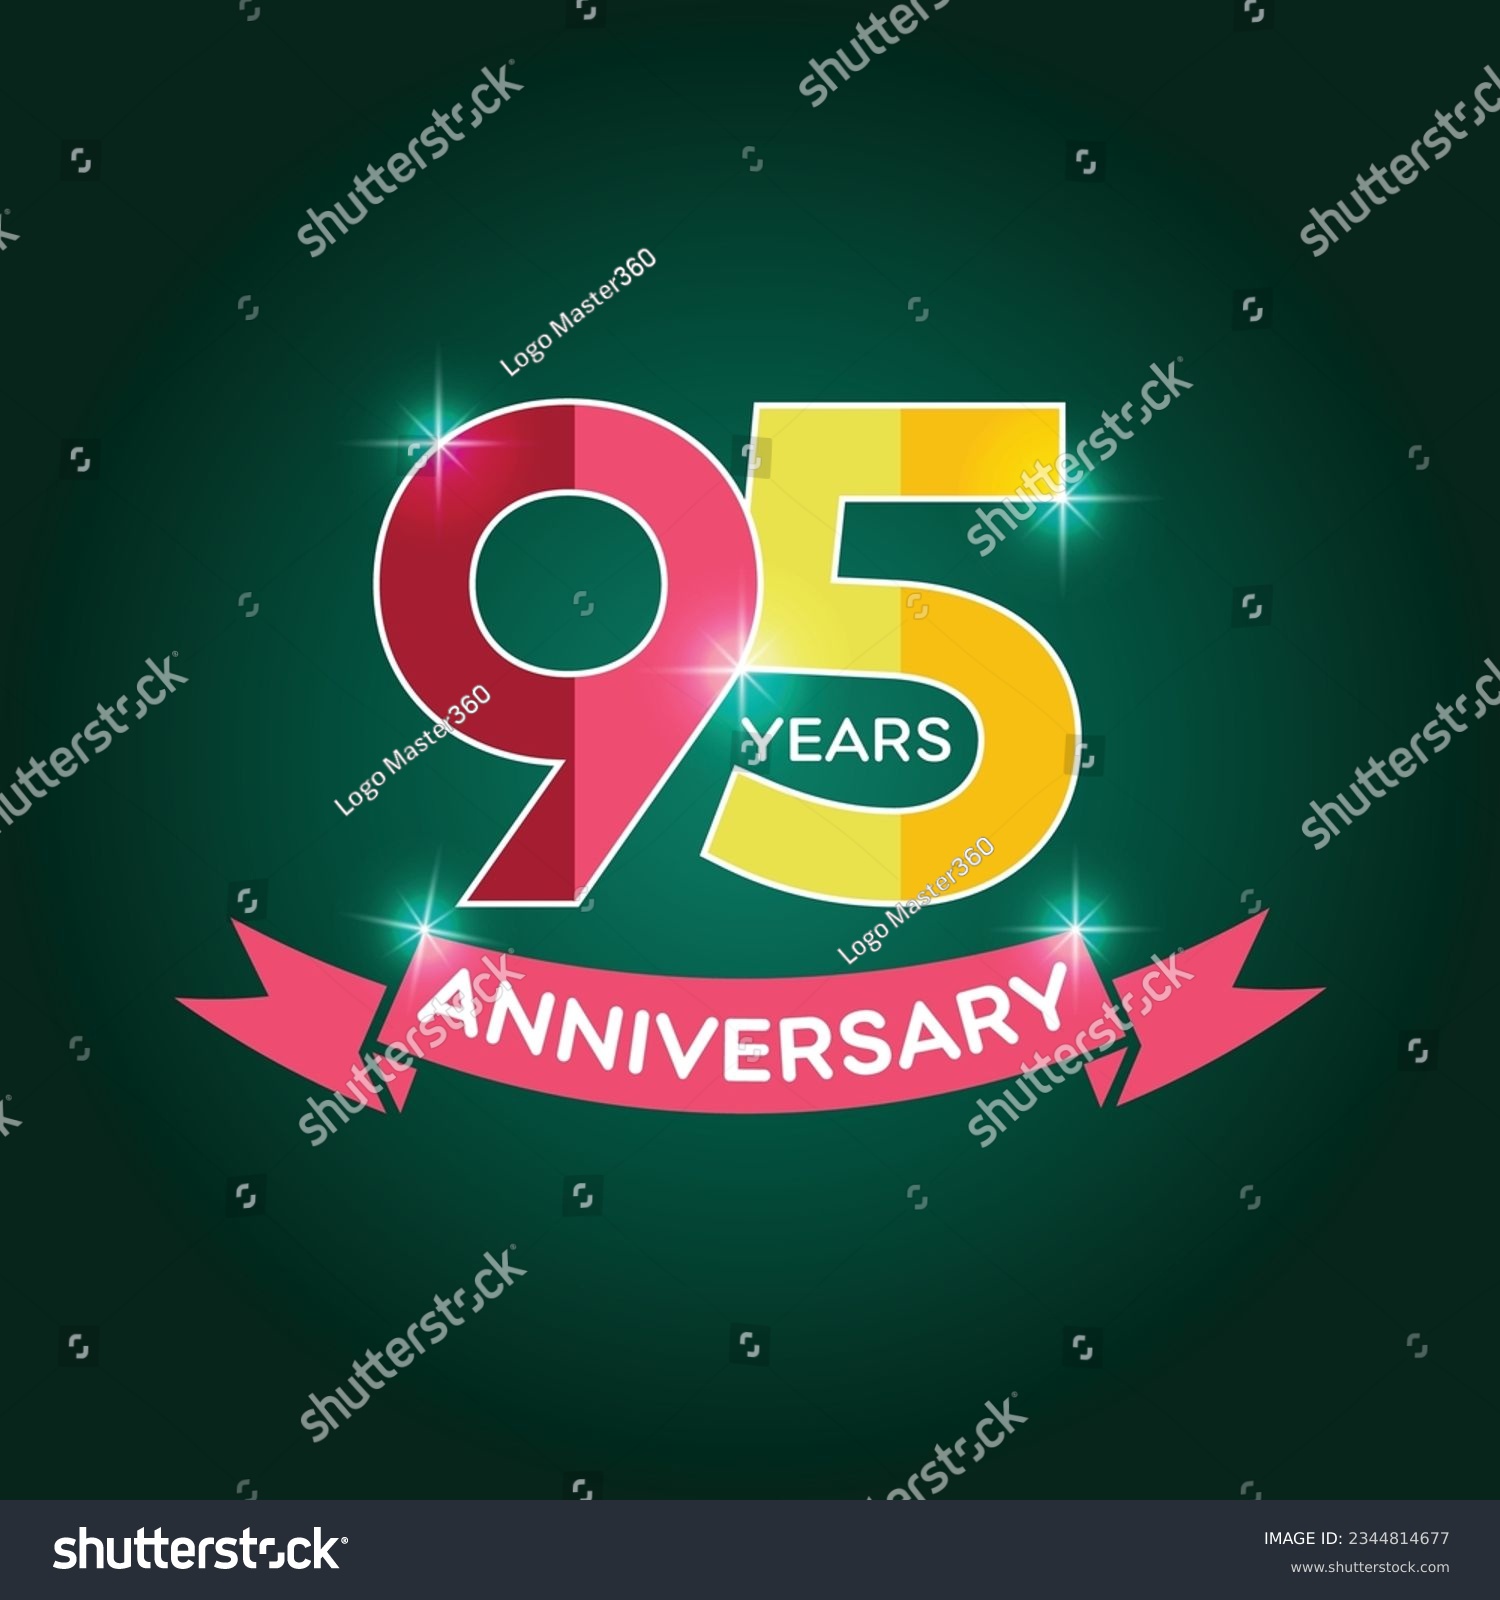 SVG of 95 years anniversary logo with red ribbon icon, flat 20th year birthday party sign svg